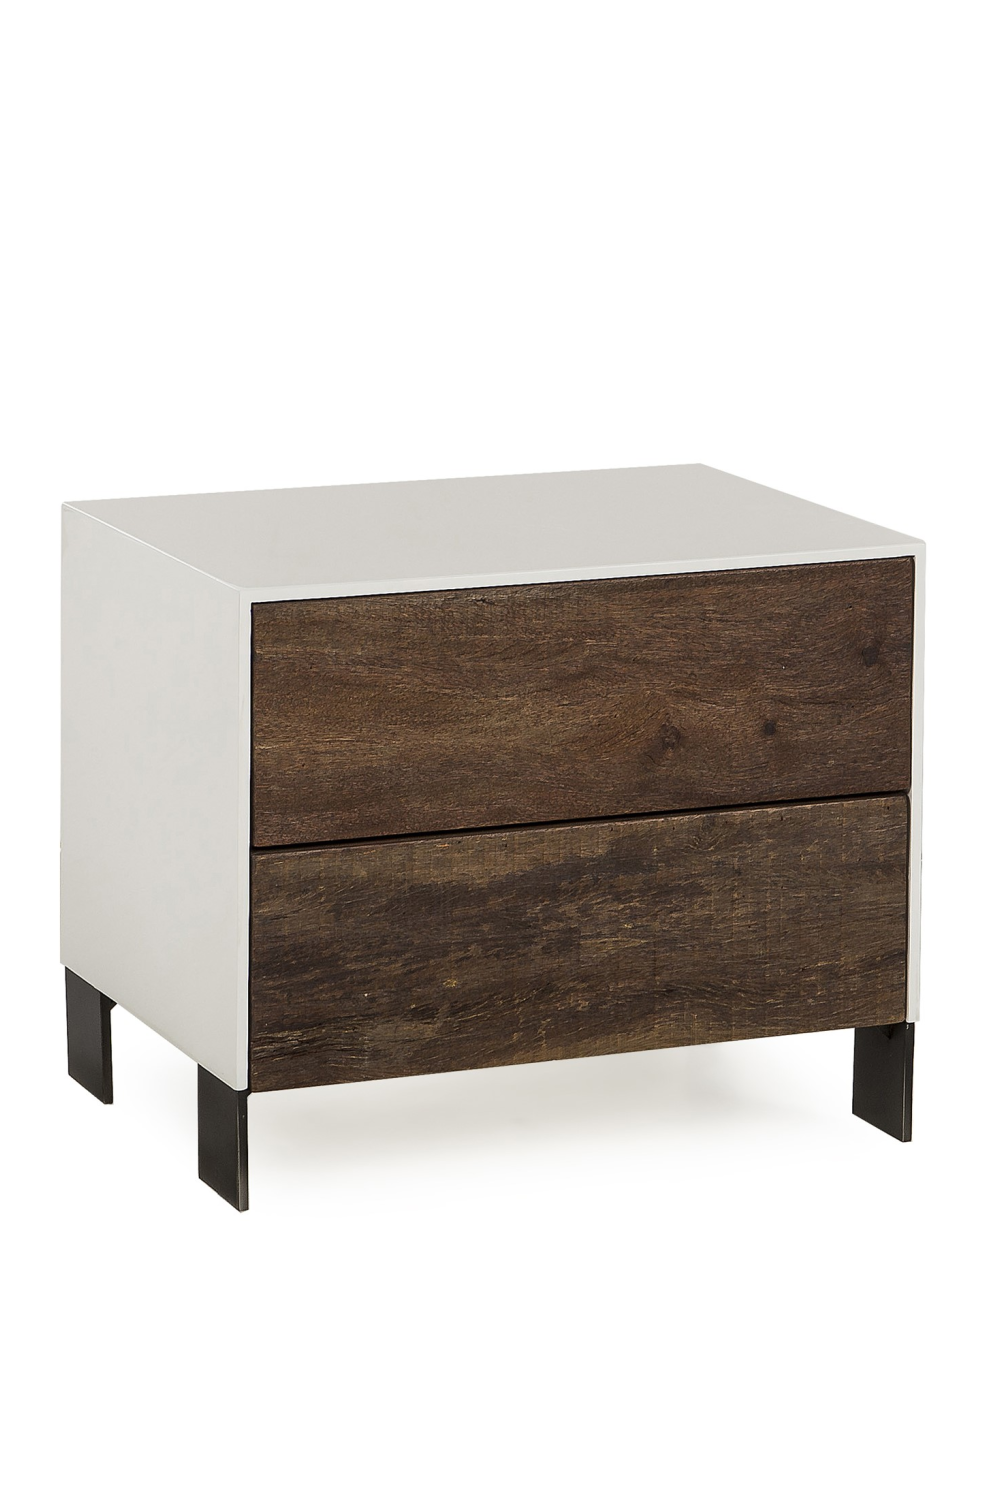 White Bedside Table with Peroba Drawers | Andrew Martin Cardosa | OROA